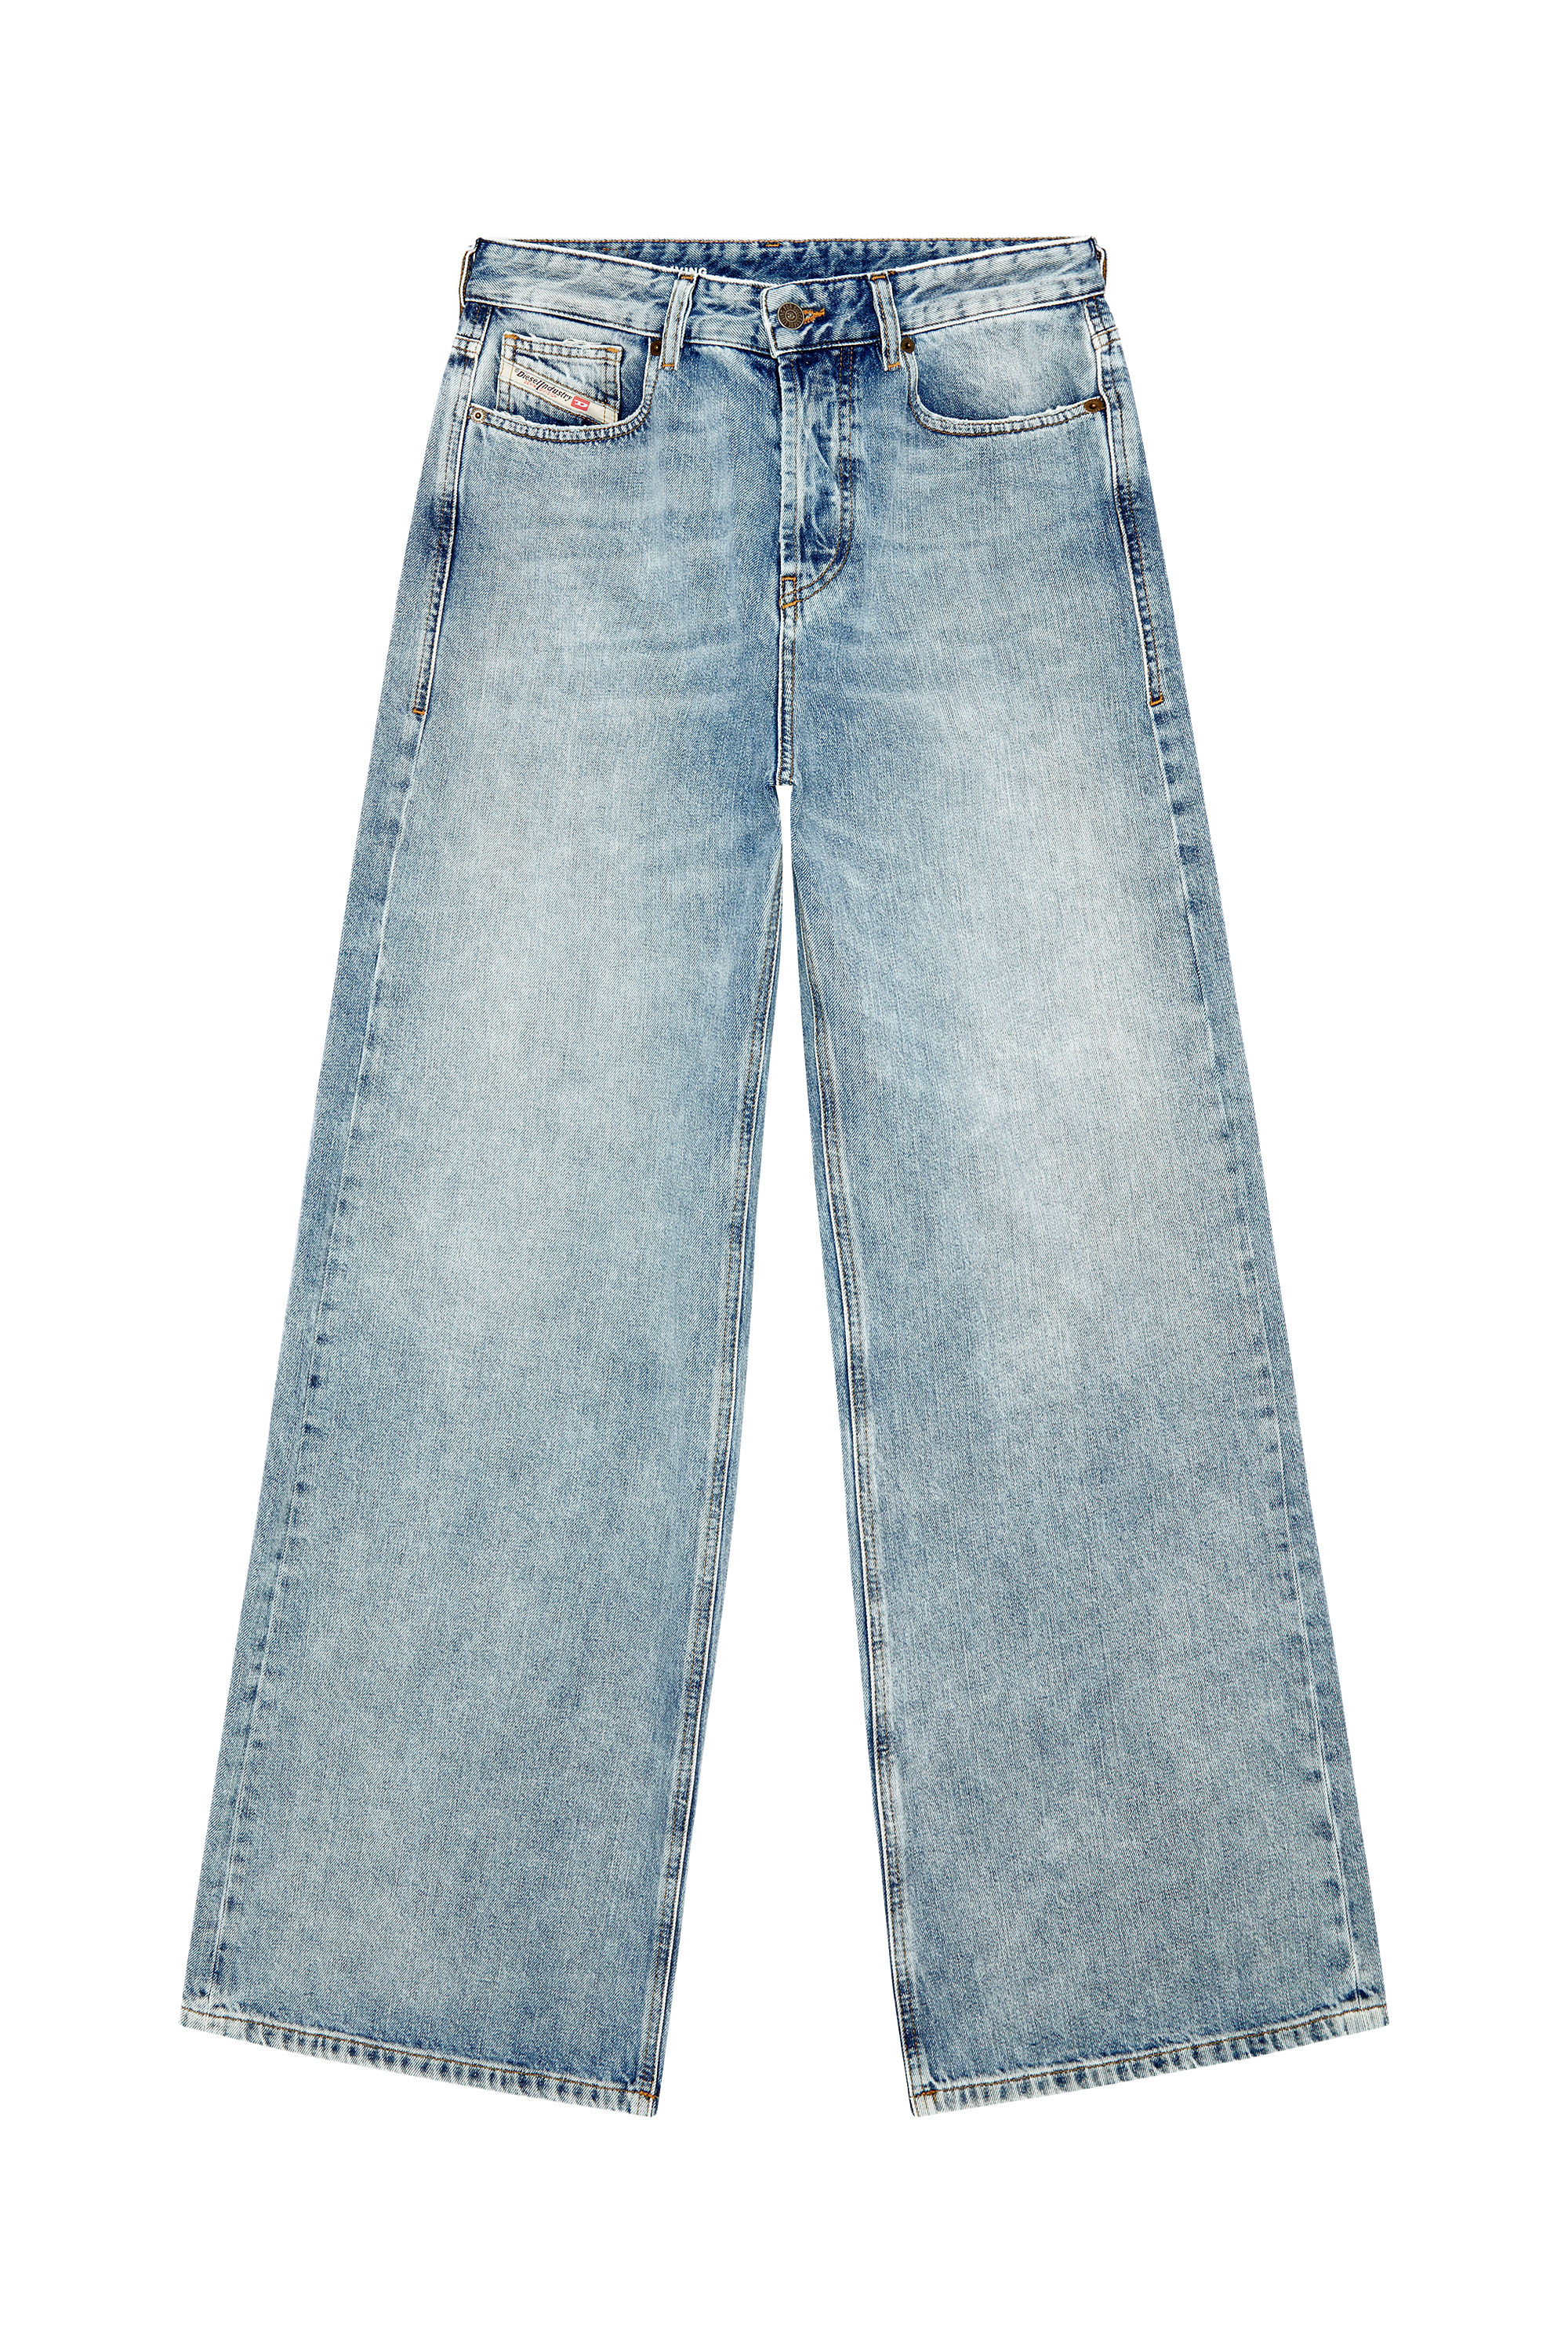 Diesel - Straight Jeans 1996 D-Sire 09H57, Mujer Straight Jeans - 1996 D-Sire in Azul marino - Image 3